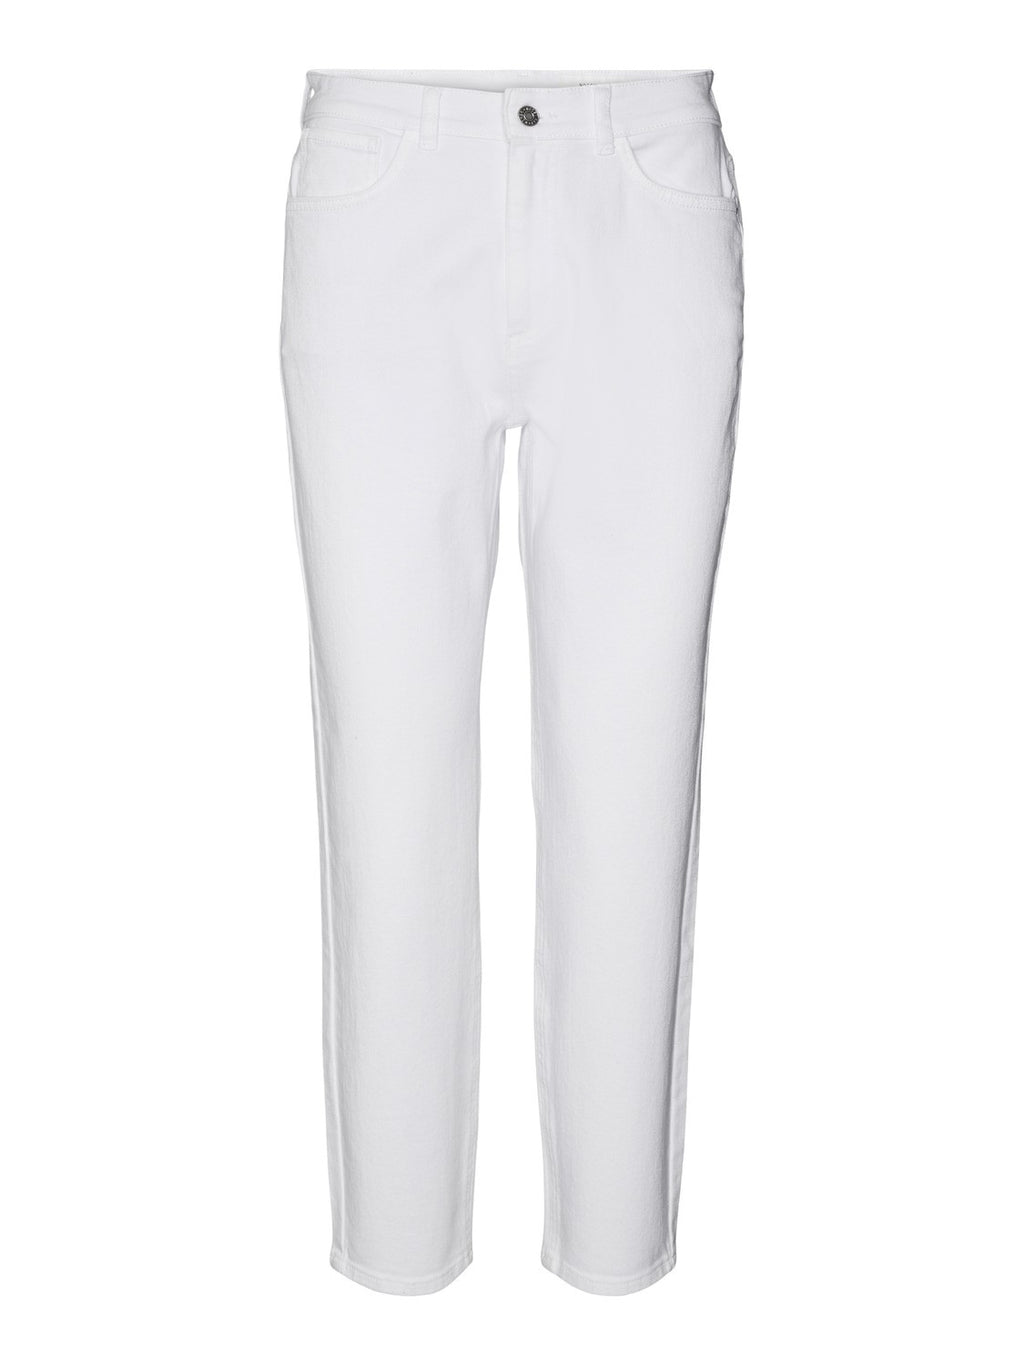 MONI High Waisted Ankle Jeans - Bright White